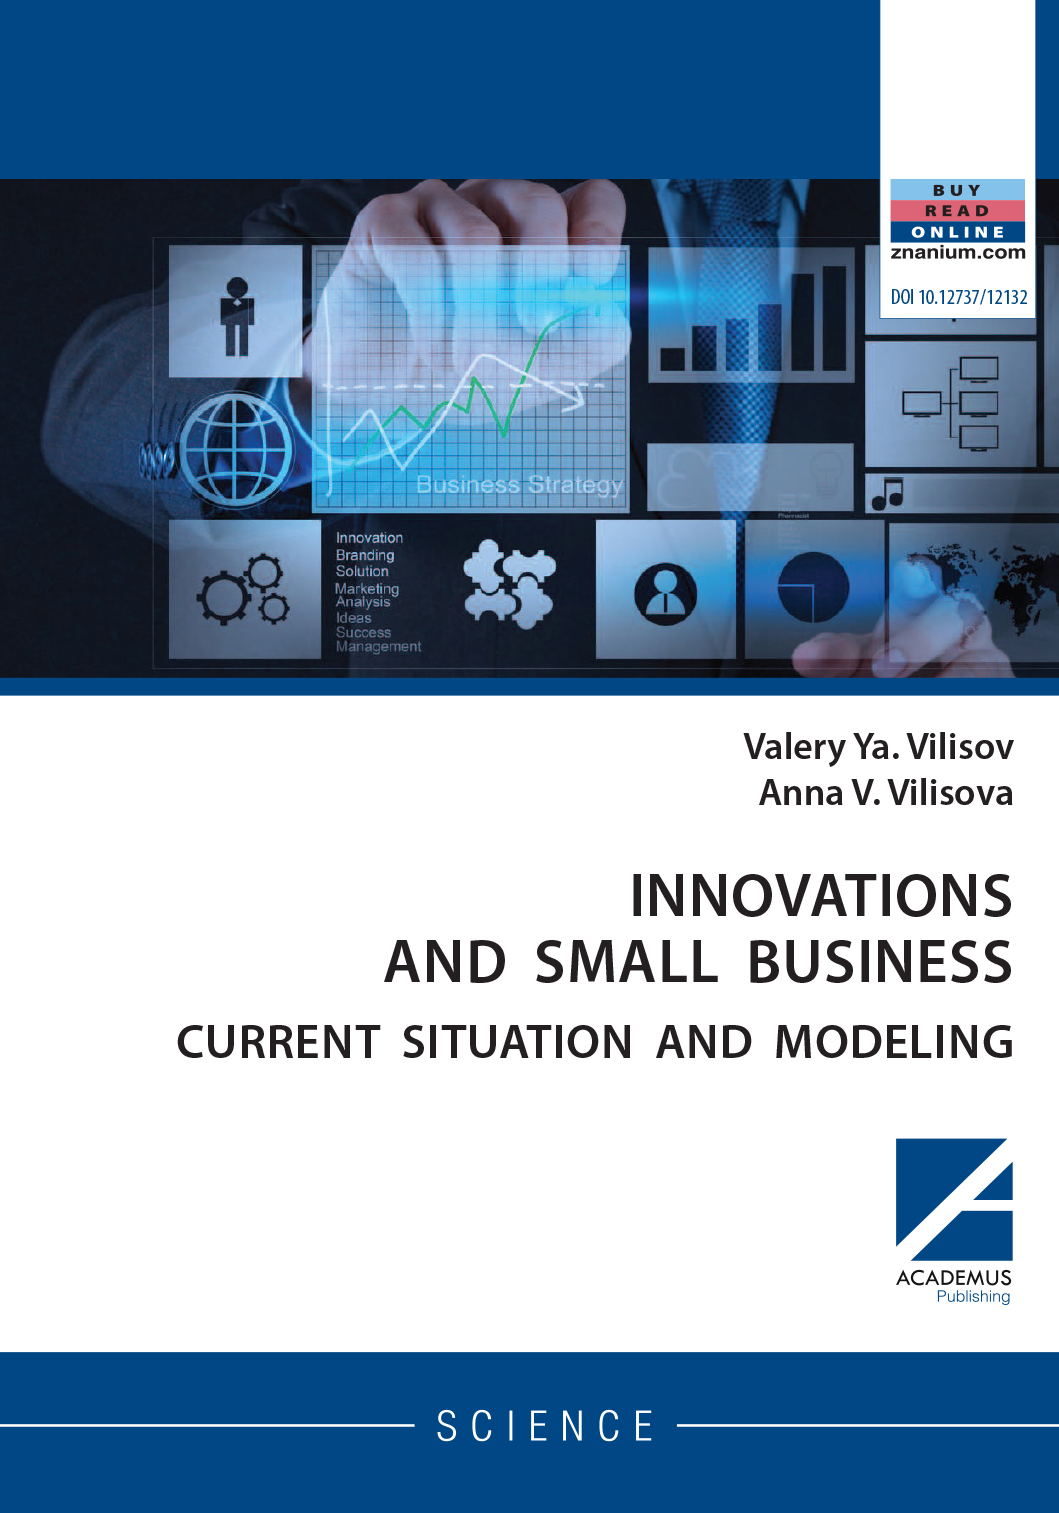             INNOVATIONS AND SMALL BUSINESS: Сurrent situation and modeling
    